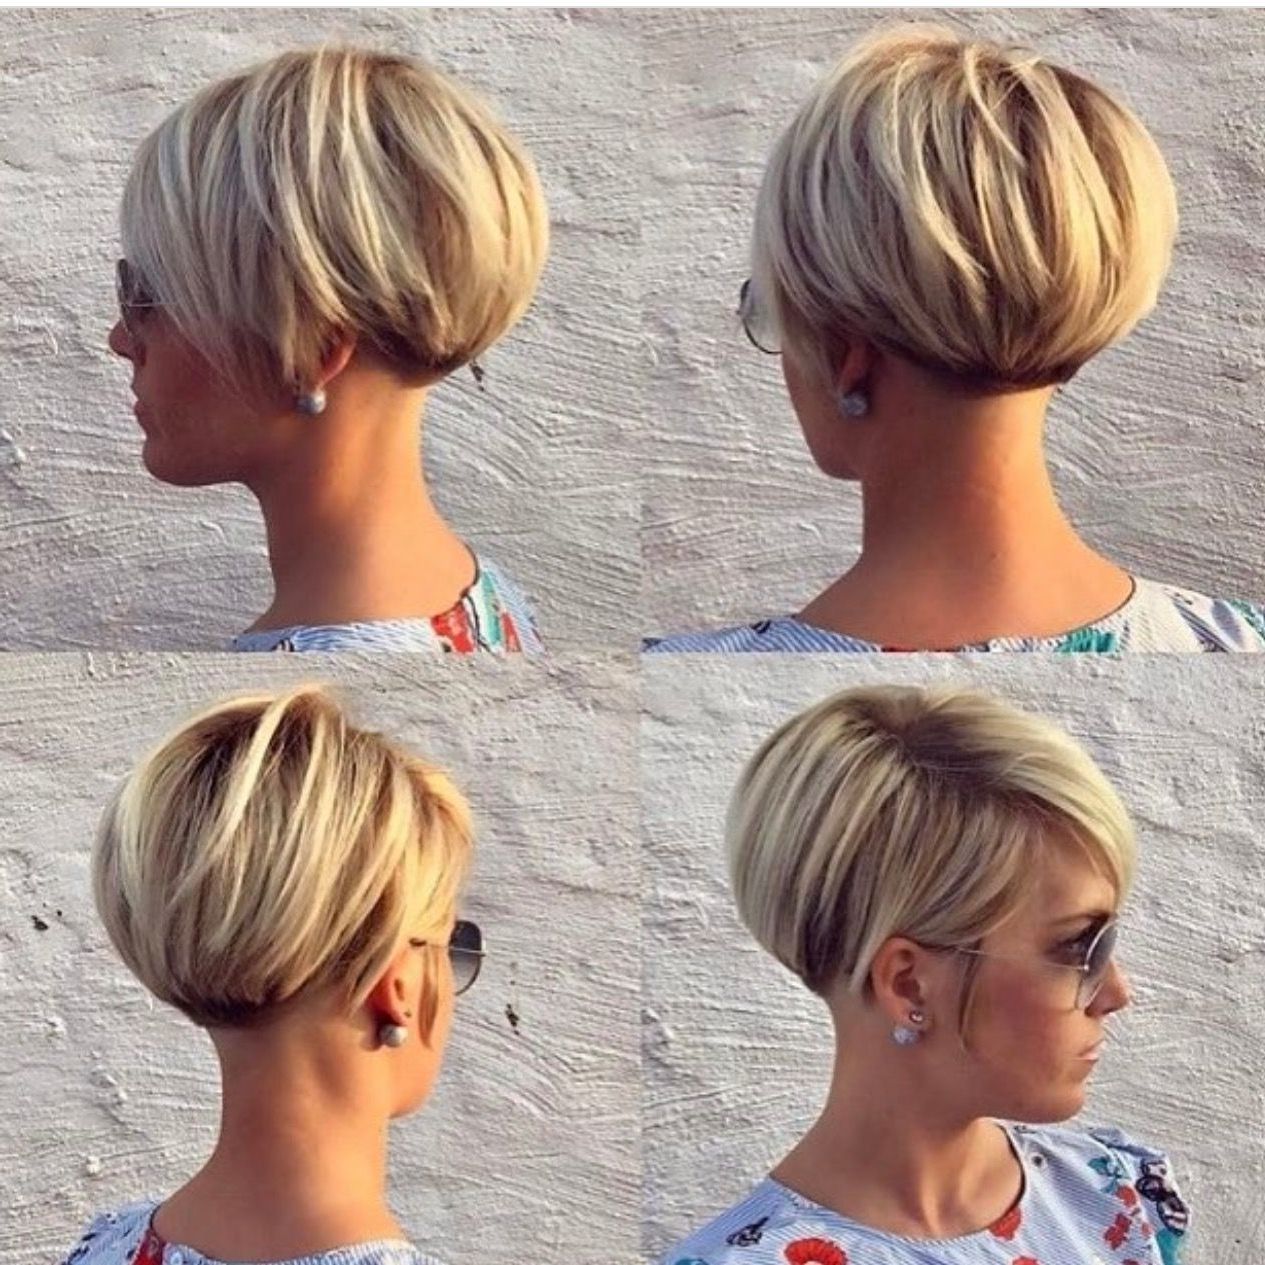 Fa3587d5d80a3610f6f20a82e4bba5b6 (1265×1265) | Haircuts Intended For Most Up To Date Short Stacked Pixie Hairstyles (View 4 of 15)